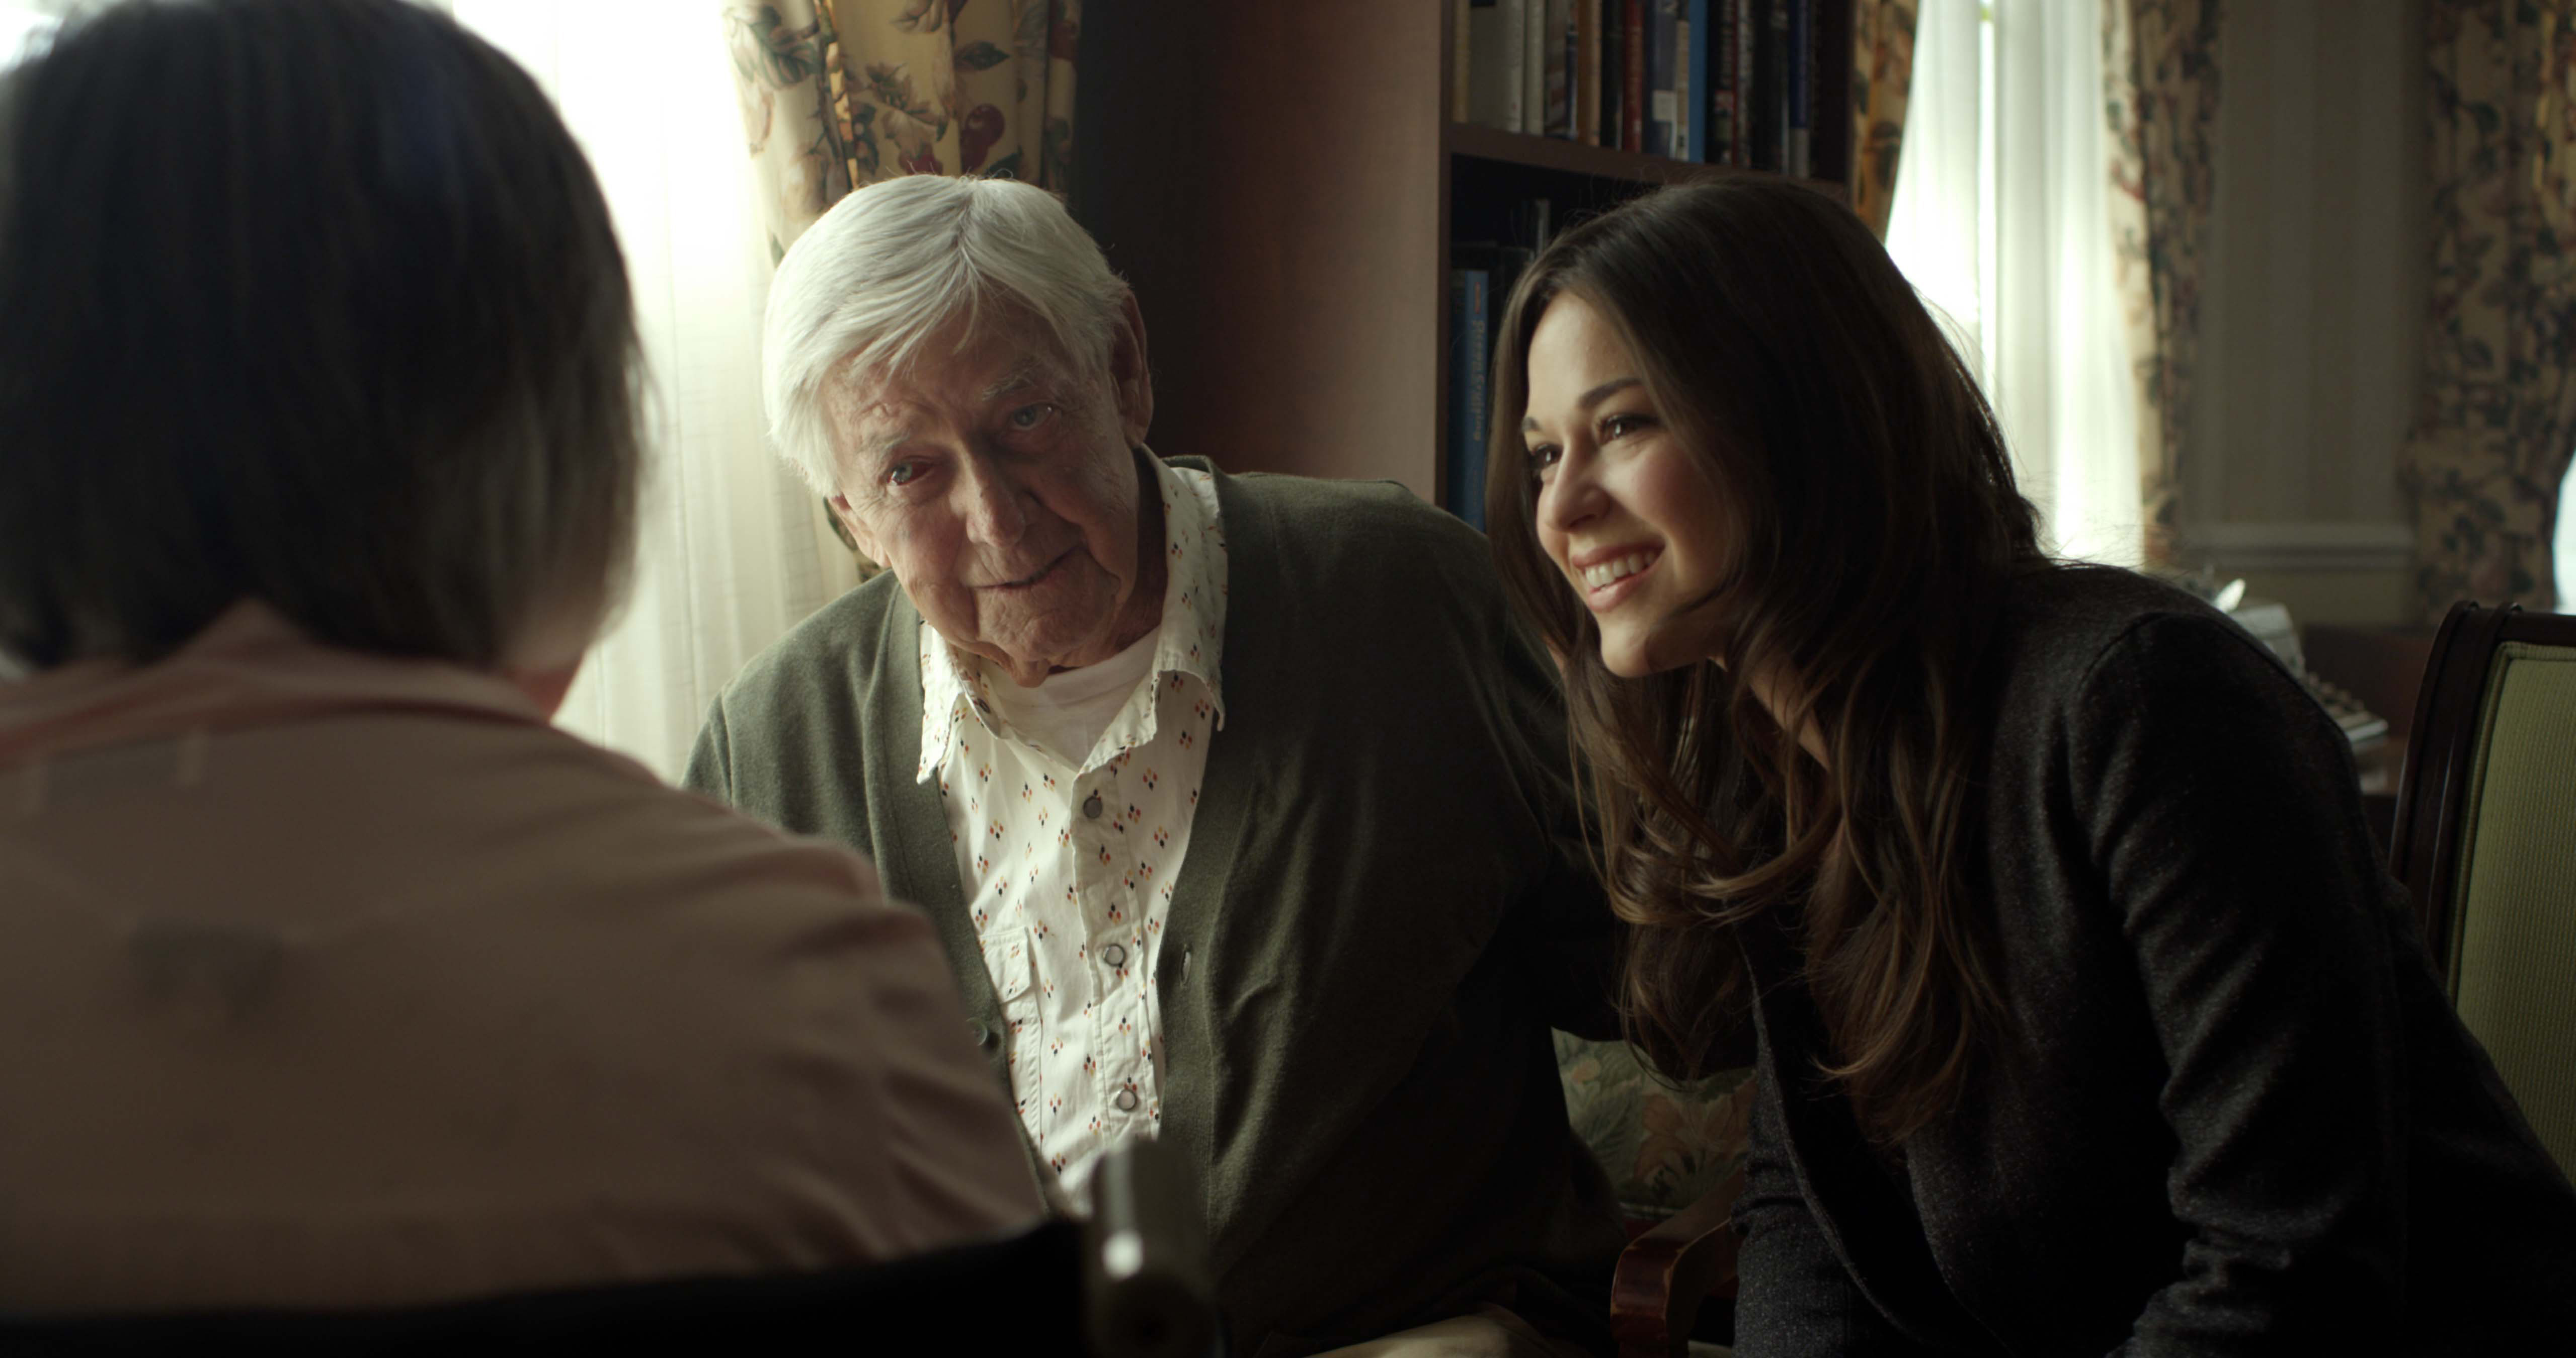 Jessica (Rachel Hendrix) and Henry (Ralph Waite) spend some time with Peggy, Henry's wife.